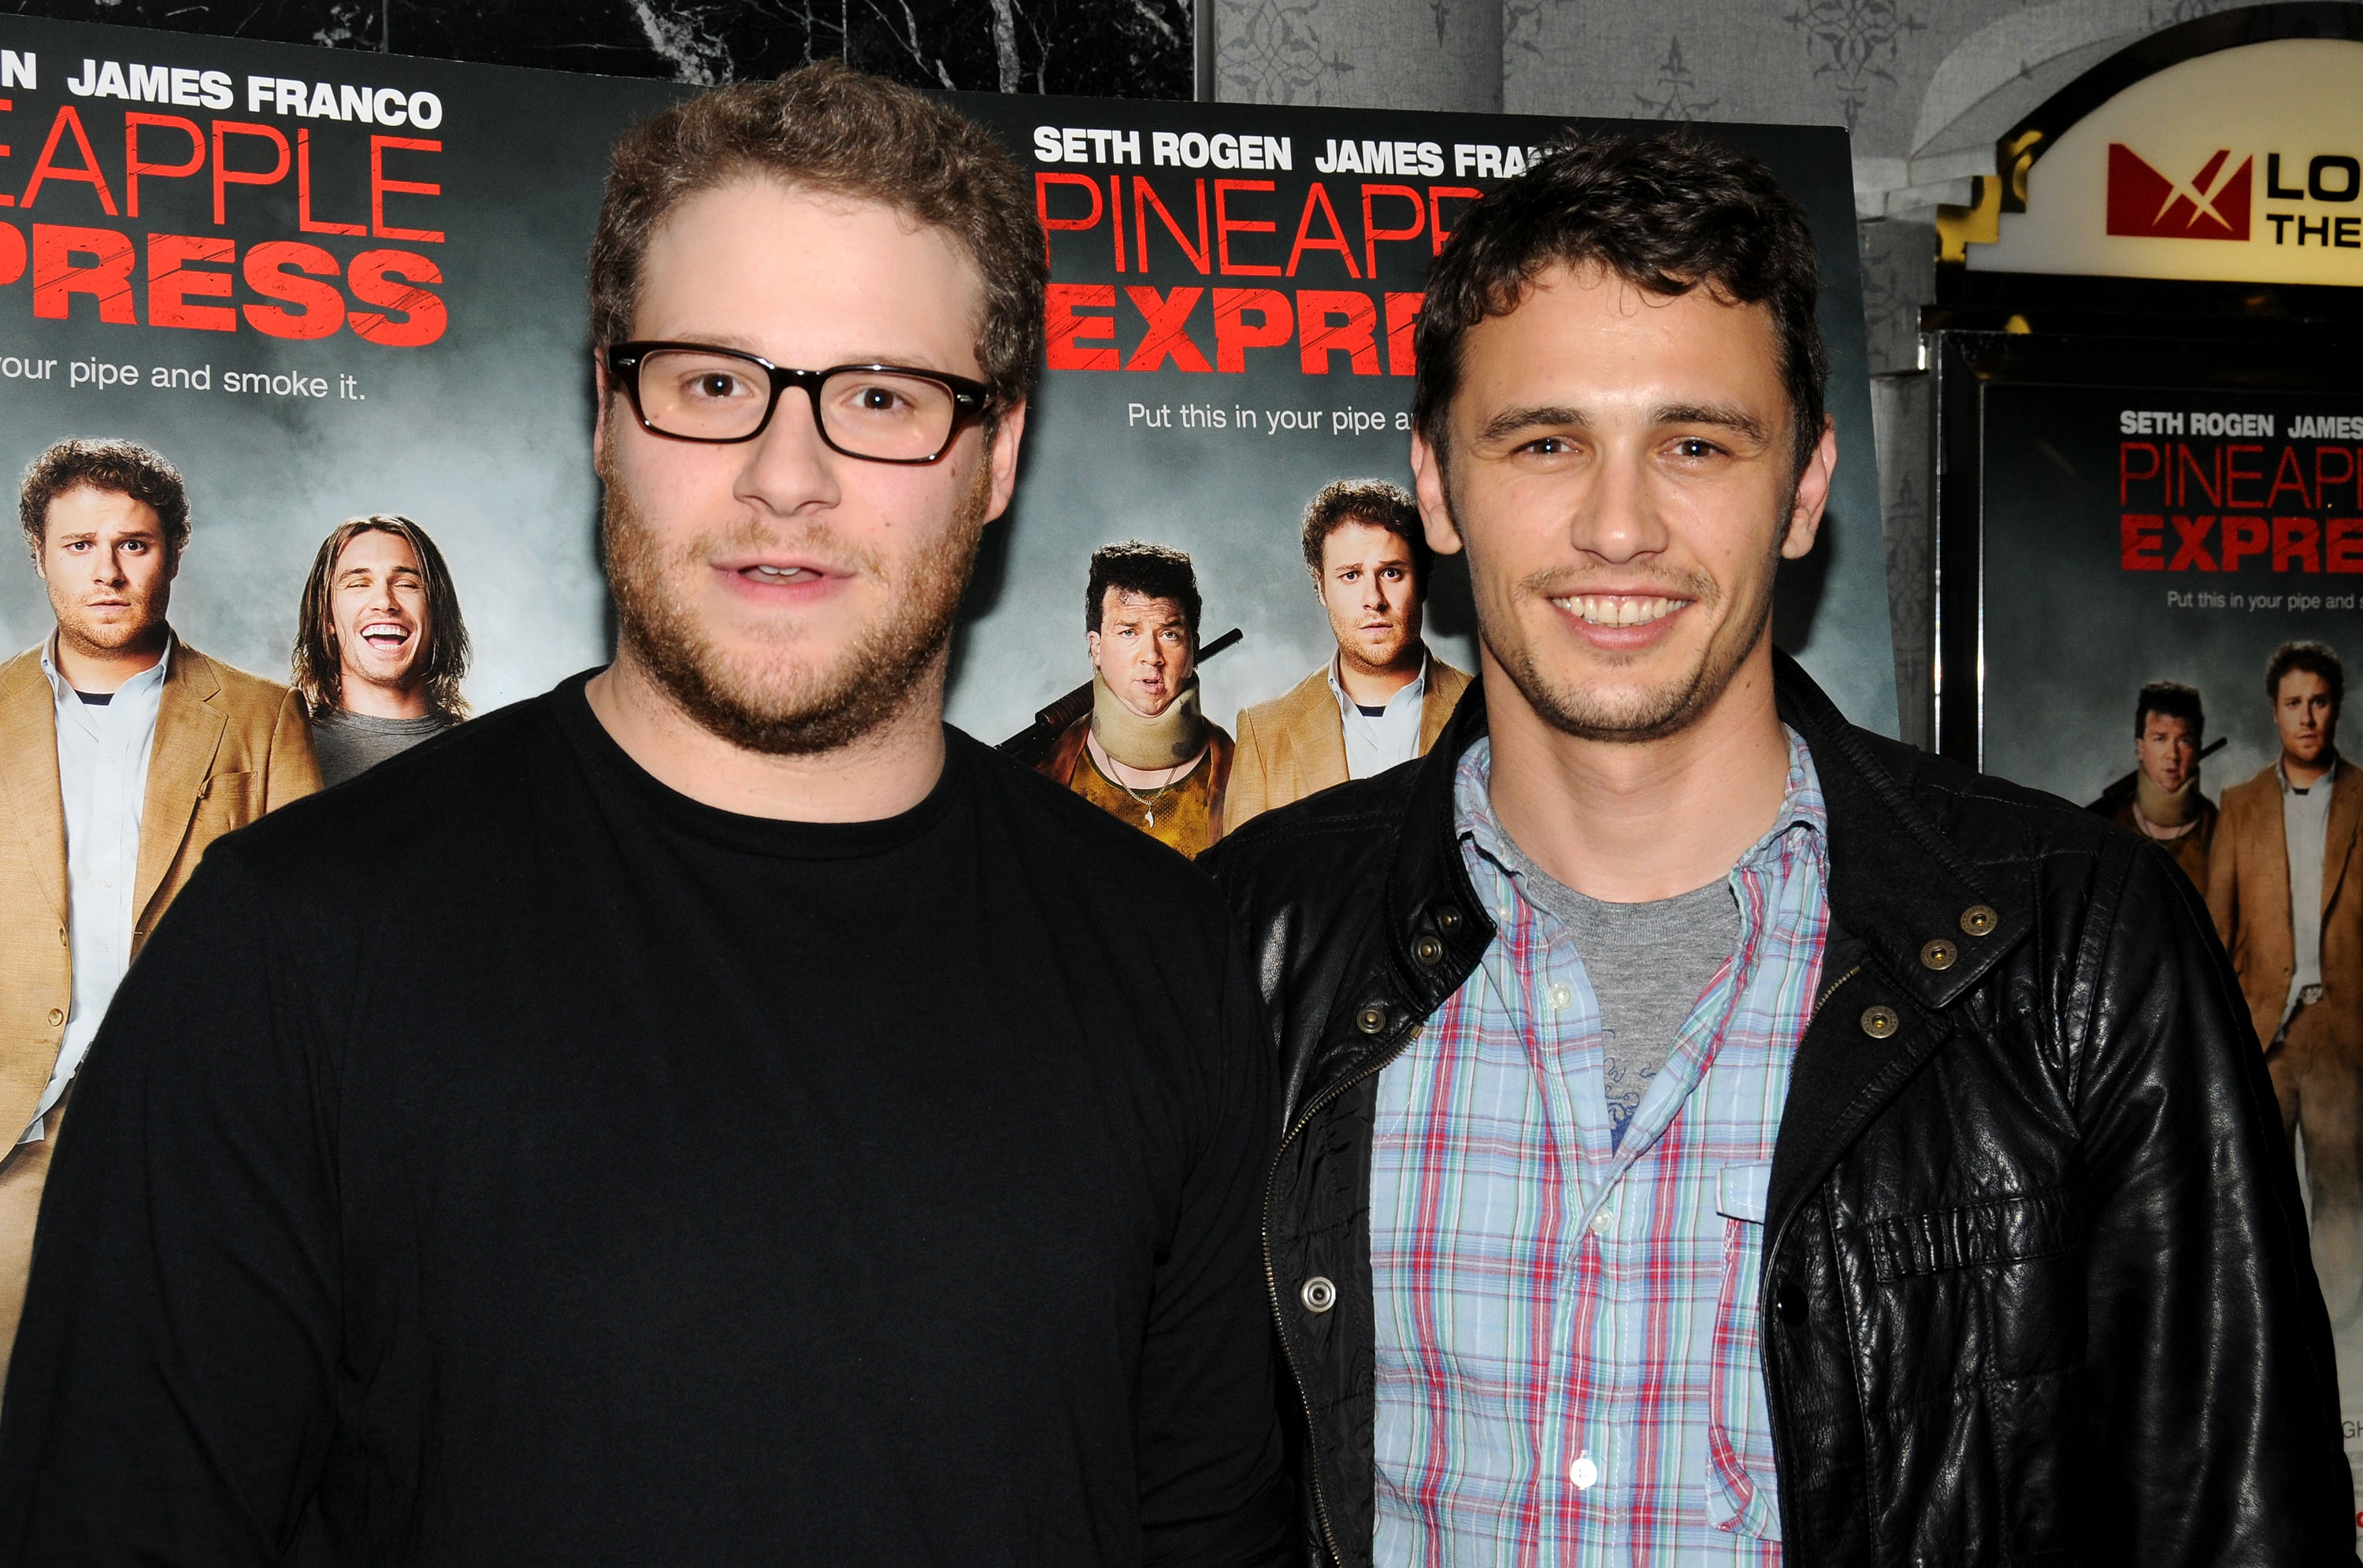 Seth Rogen and James Franco of 'Pineapple Express'